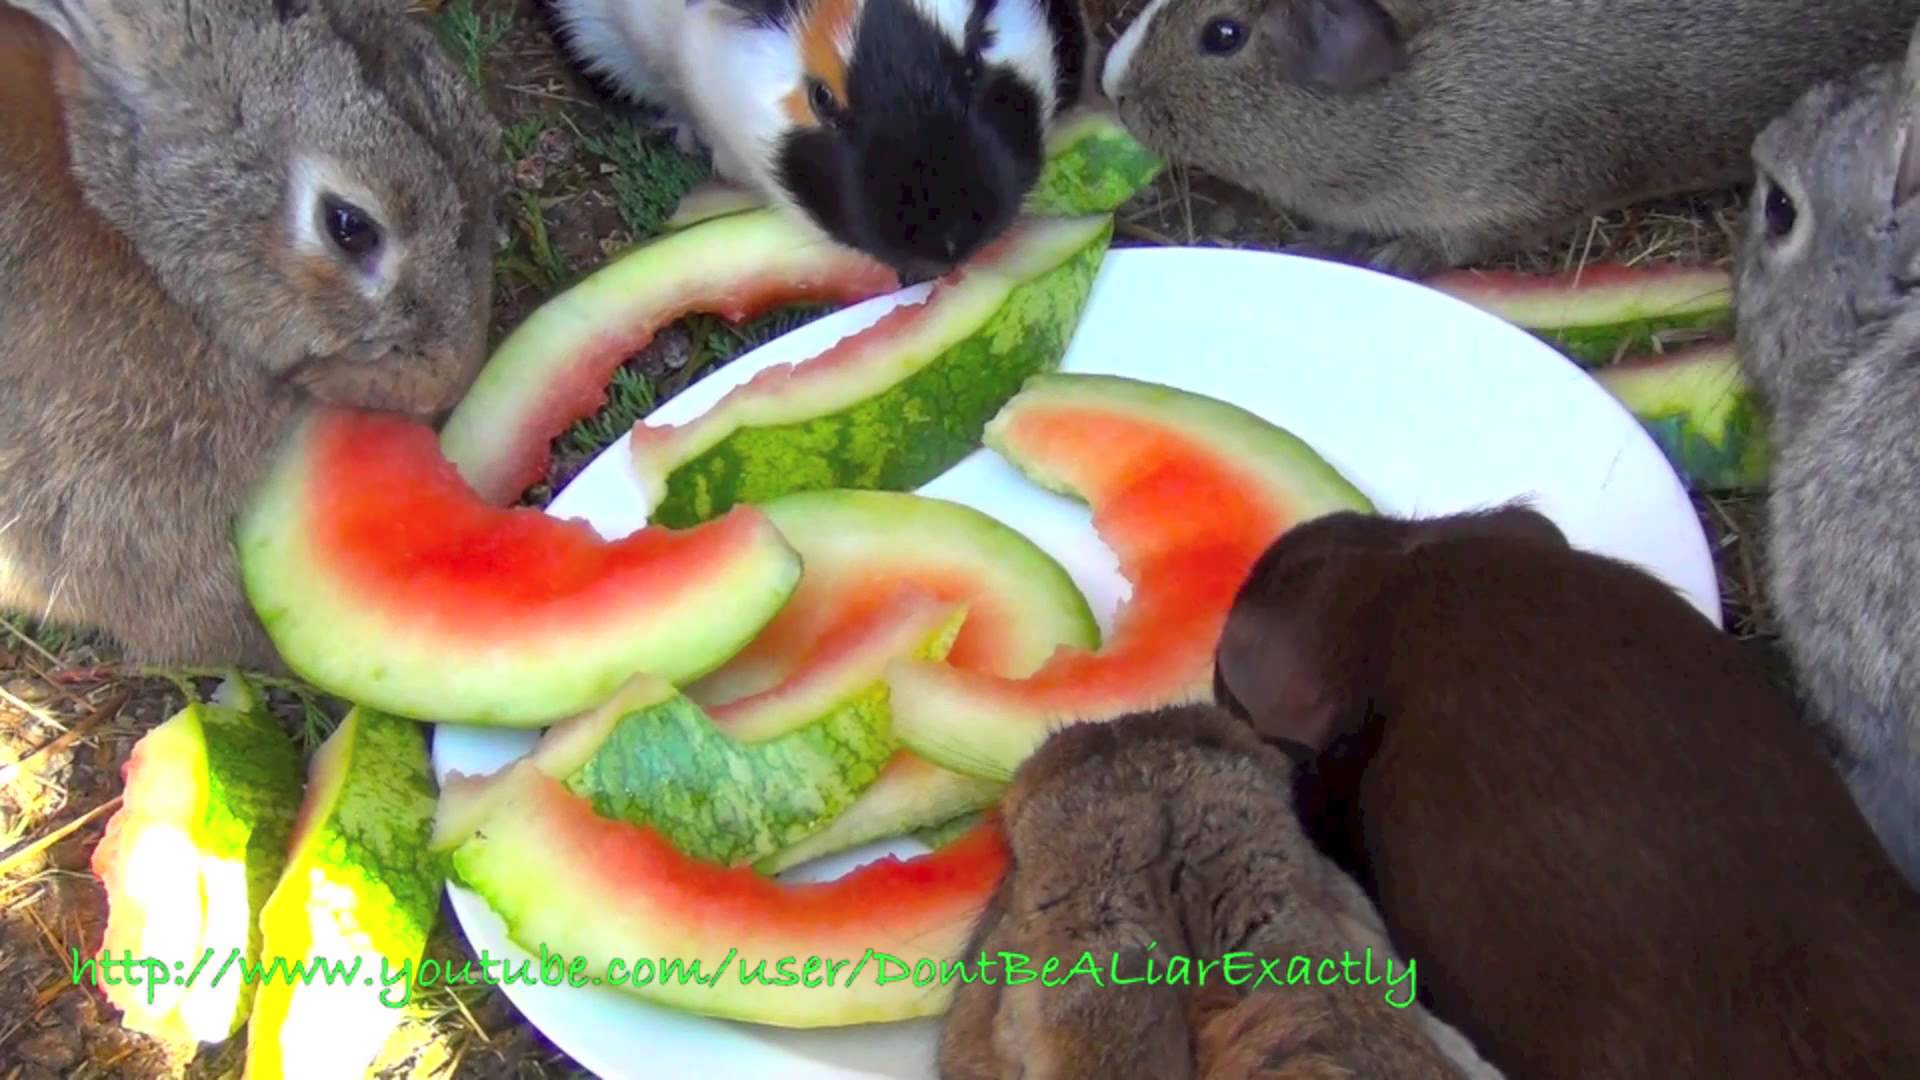 Bunny Rabbits & Guinea Pigs Eating Watermelon Rinds - YouTube